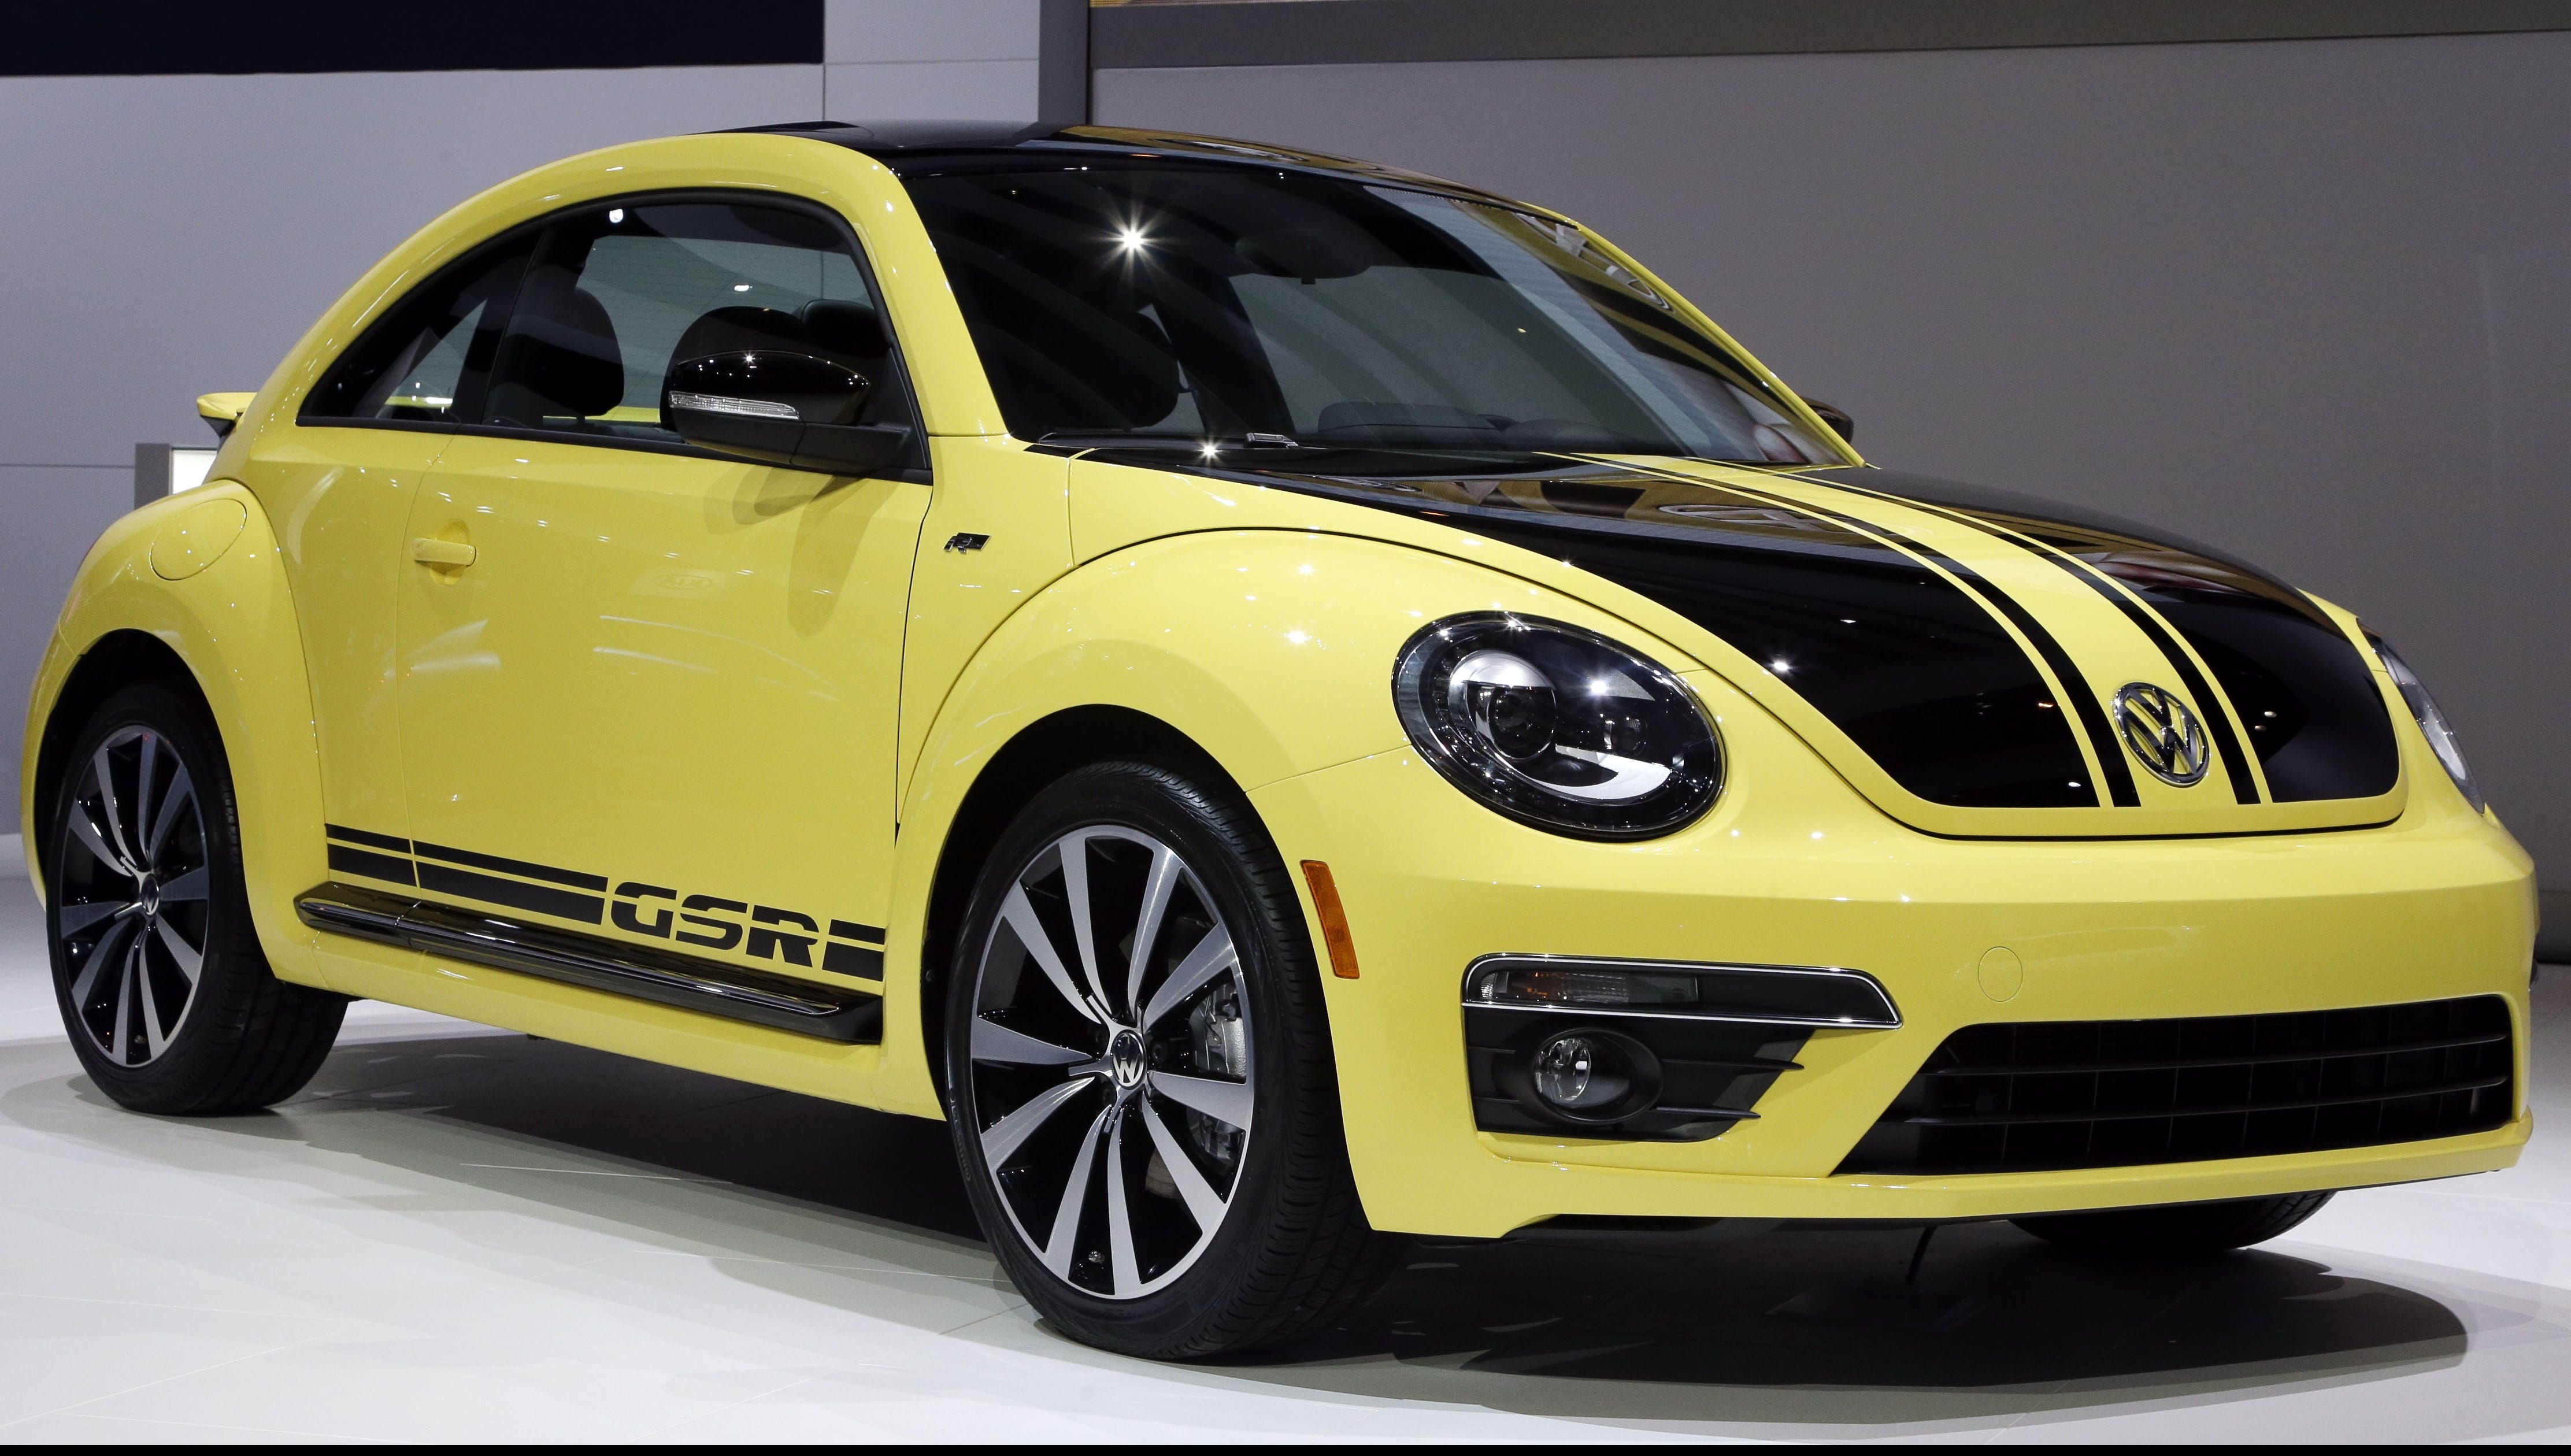 VW shows hot, limited-edition Beetle in Chicago